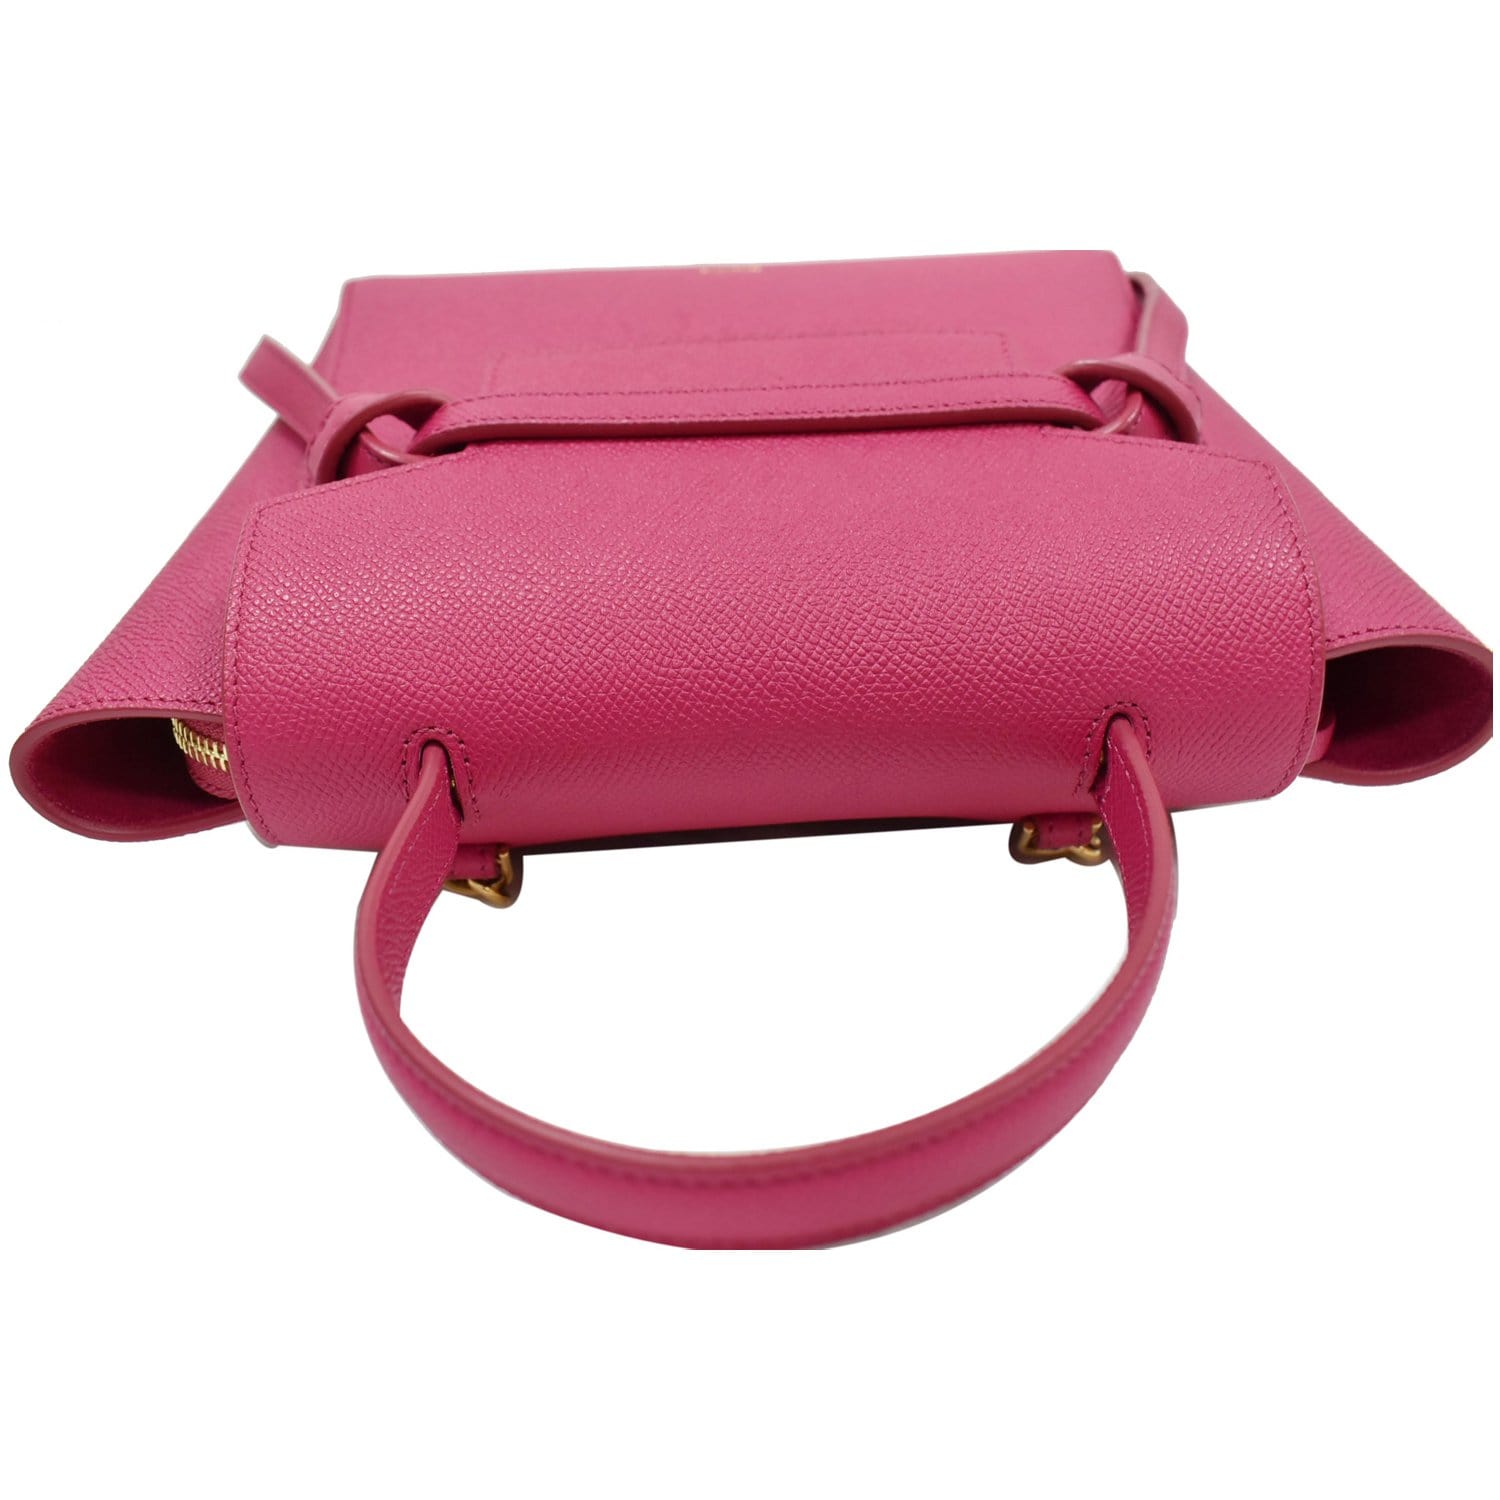 Locò Micro Bag In Calfskin Leather With Chain for Woman in Rose